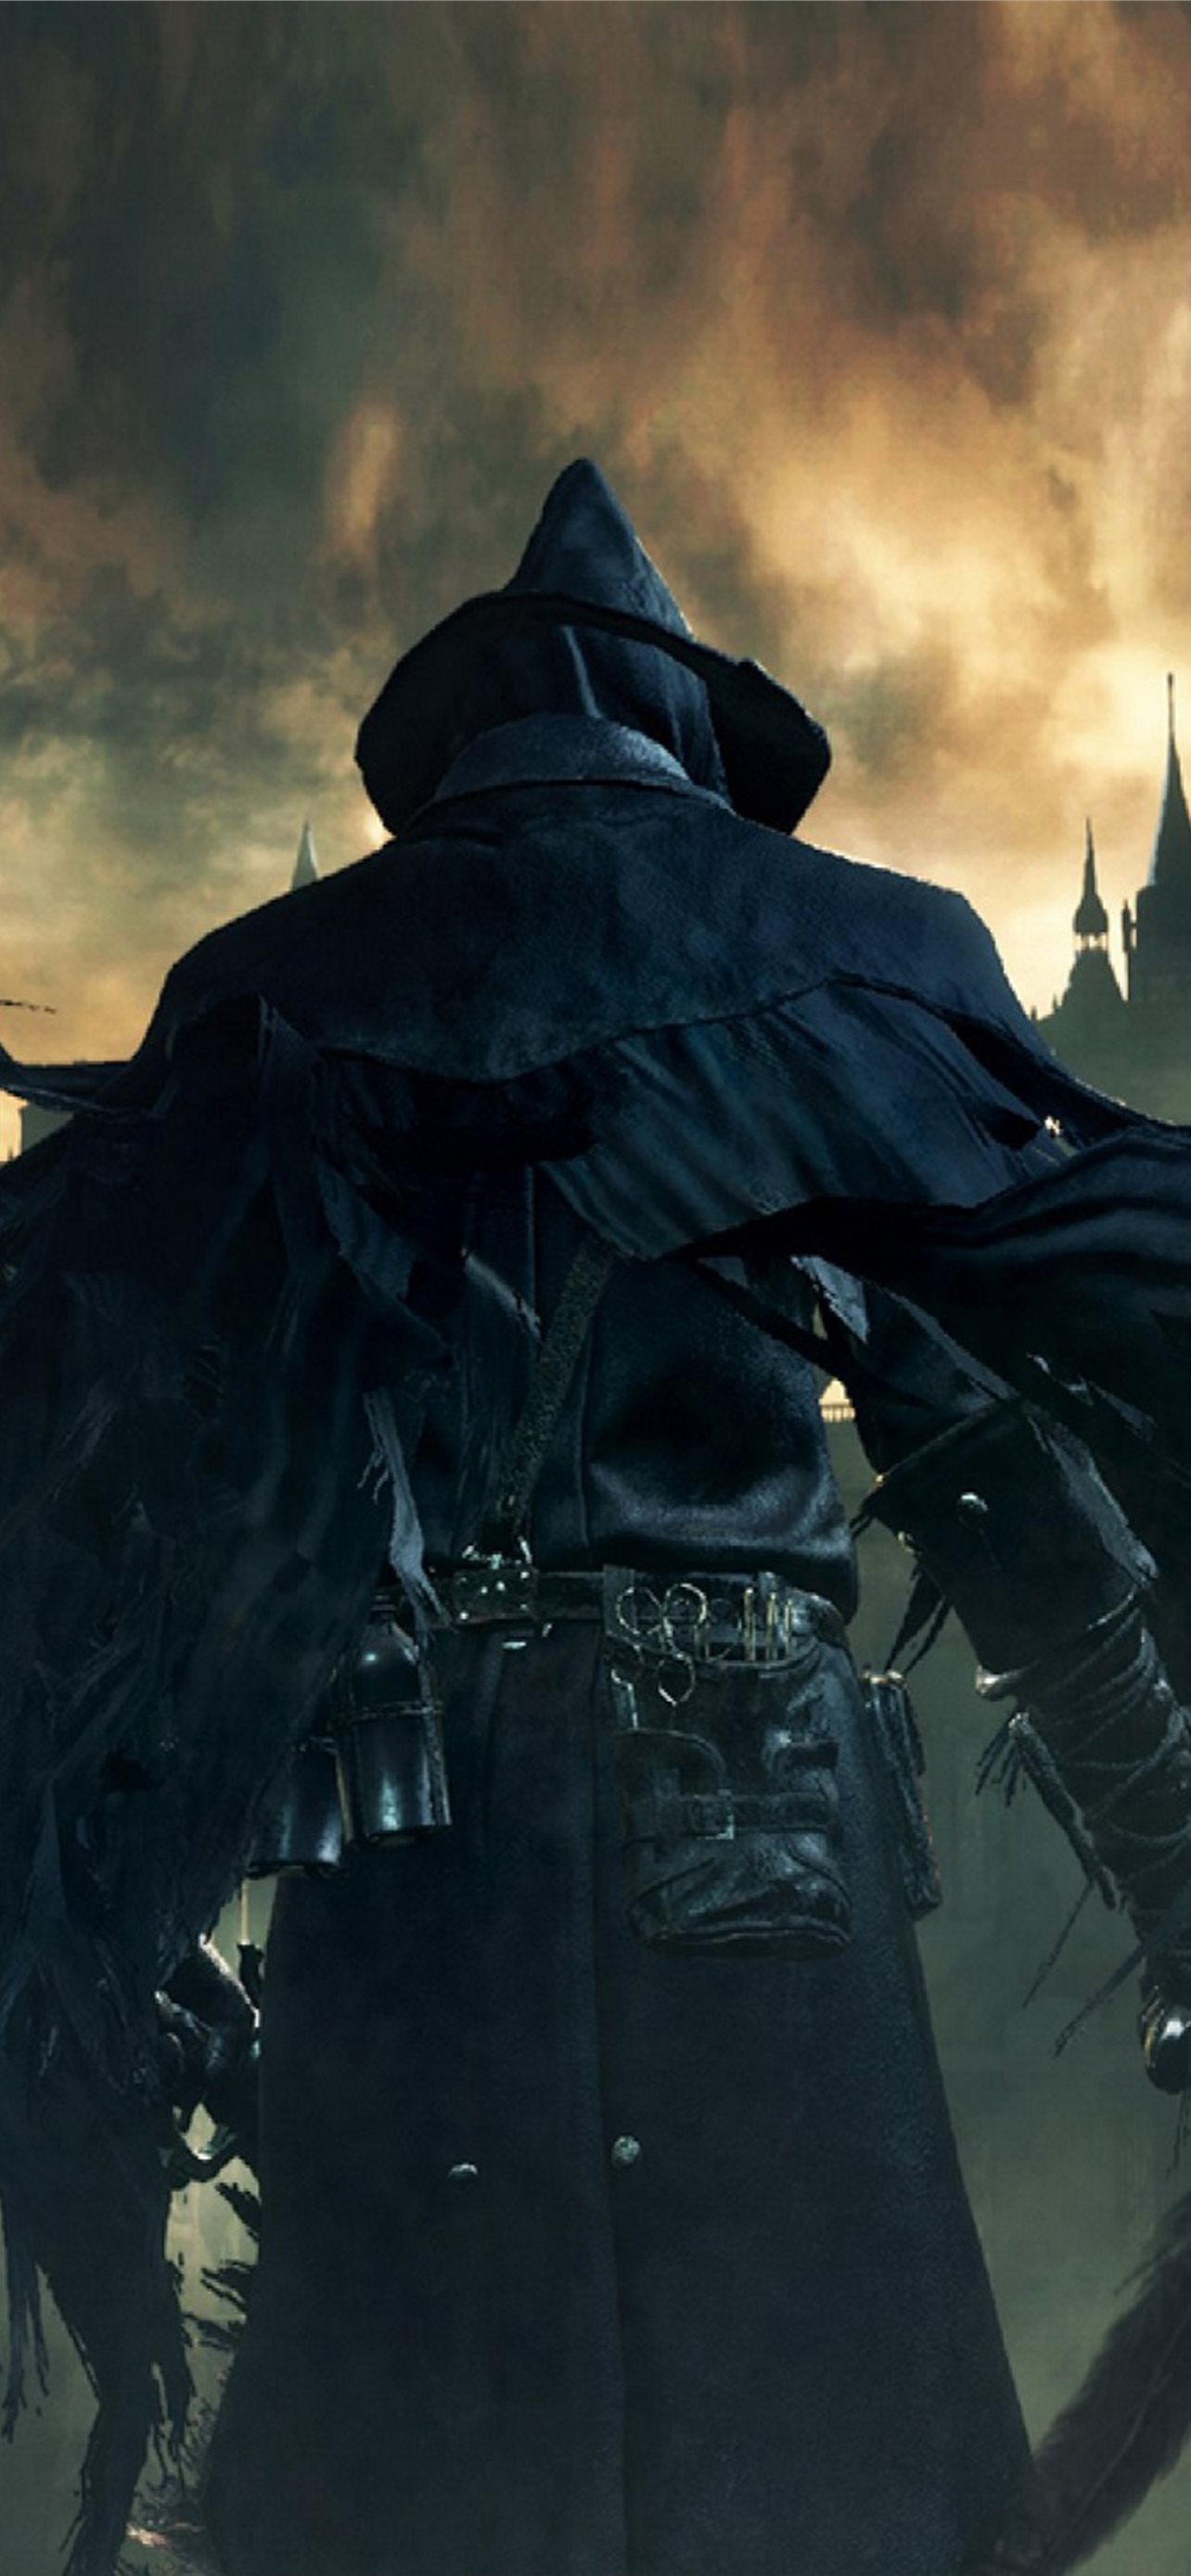 Bloodborne Video Game 4K Ultra HD Mobile iPhone Wallpaper Free Download